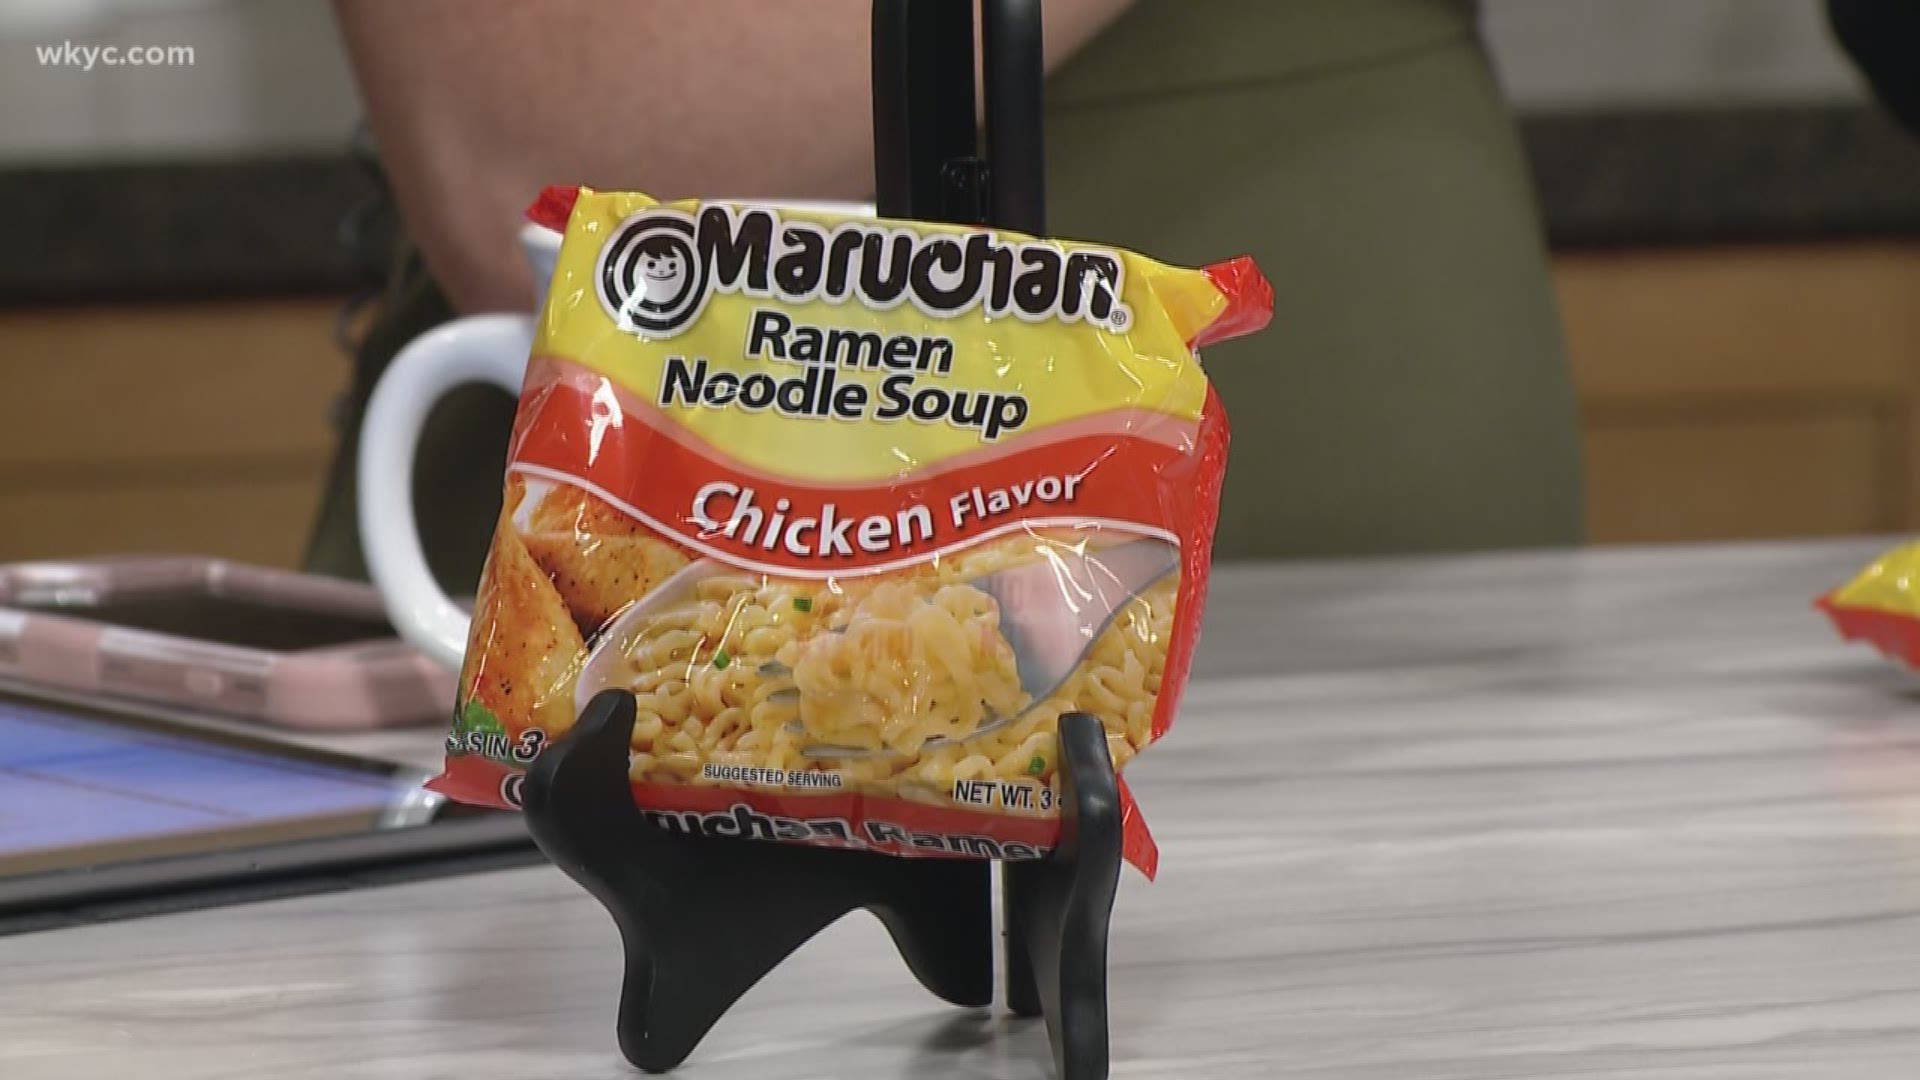 Nov. 14, 2018: What?!?! We found out that Maureen Kyle and Hollie Strano have never eaten Ramen noodles. So we had them try some live on TV.